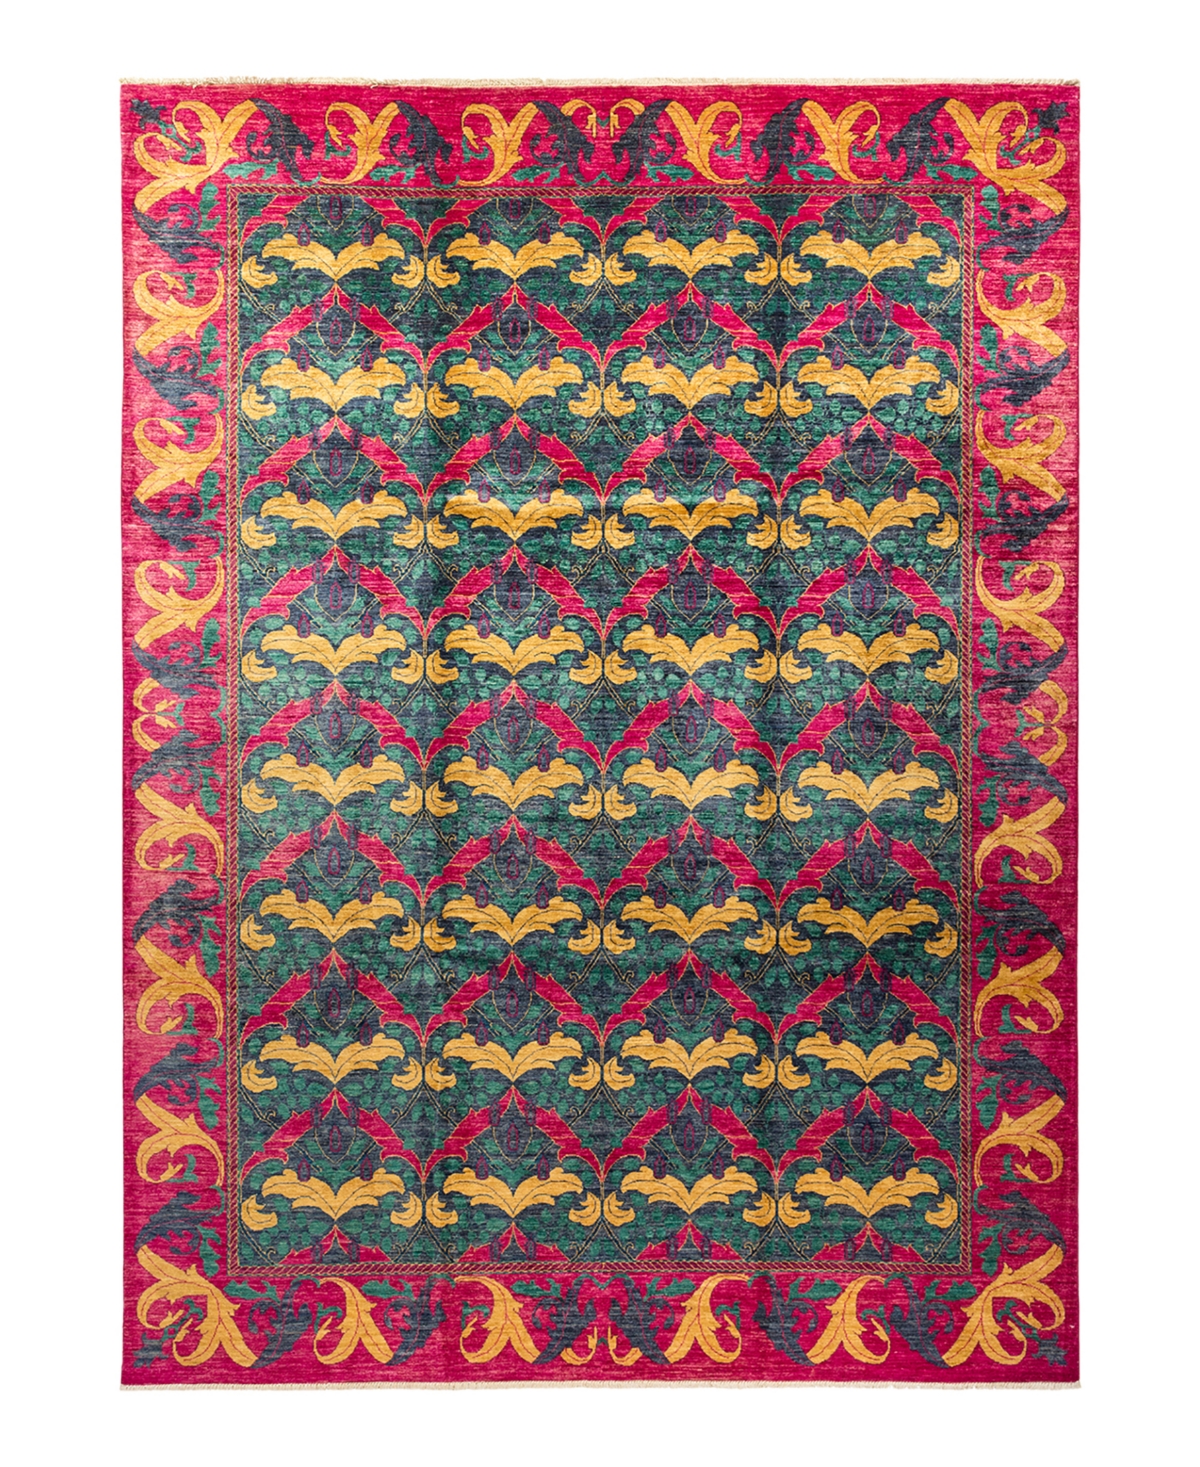 Adorn Hand Woven Rugs Arts and Crafts M1625 9' x 12'2in Area Rug - Purple